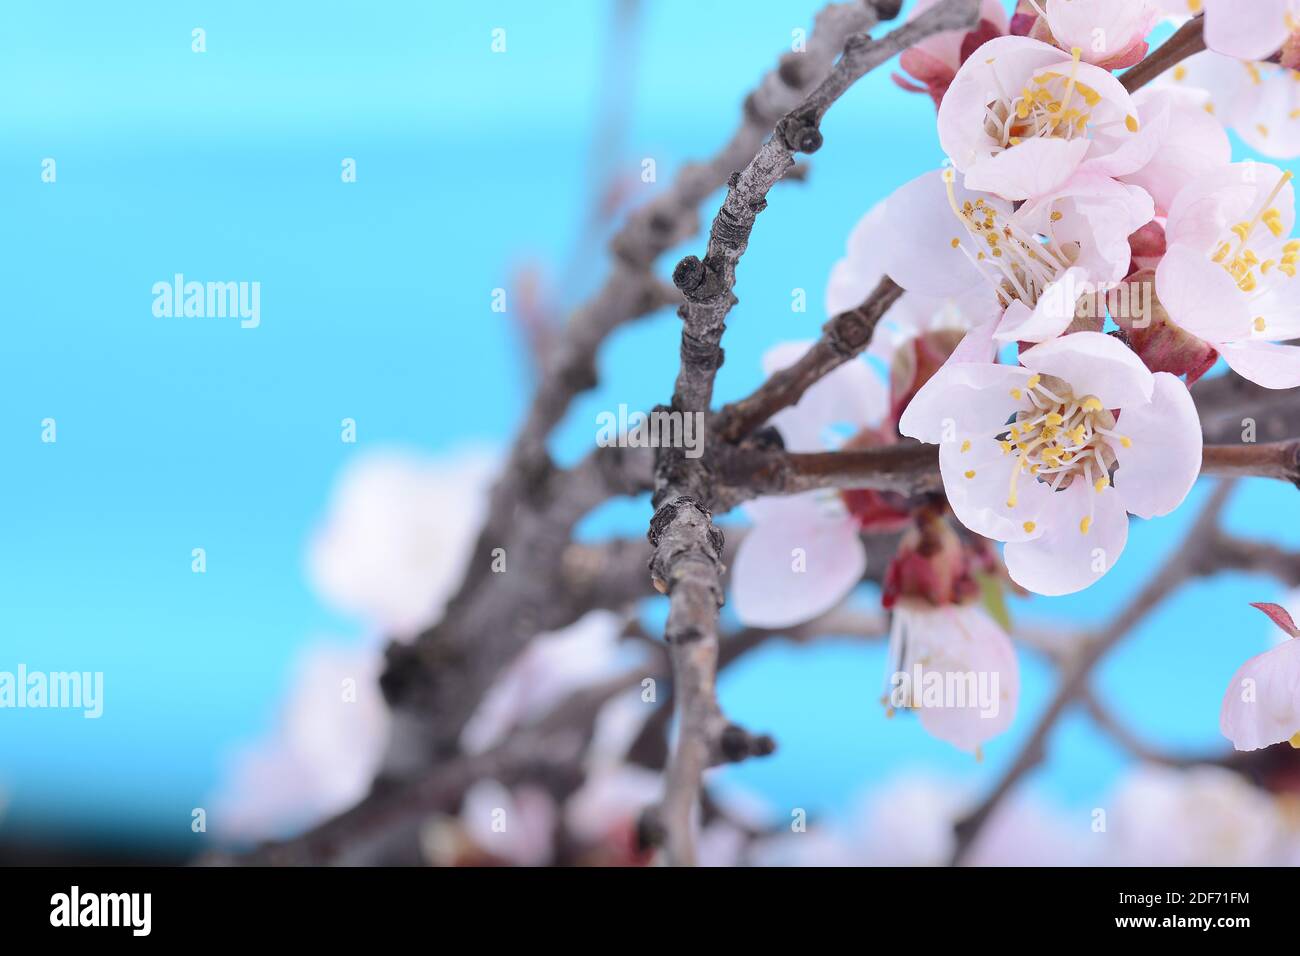 Apple tree blossom flower on branch at spring. Beautiful blooming flower close up on blue background. Stock Photo